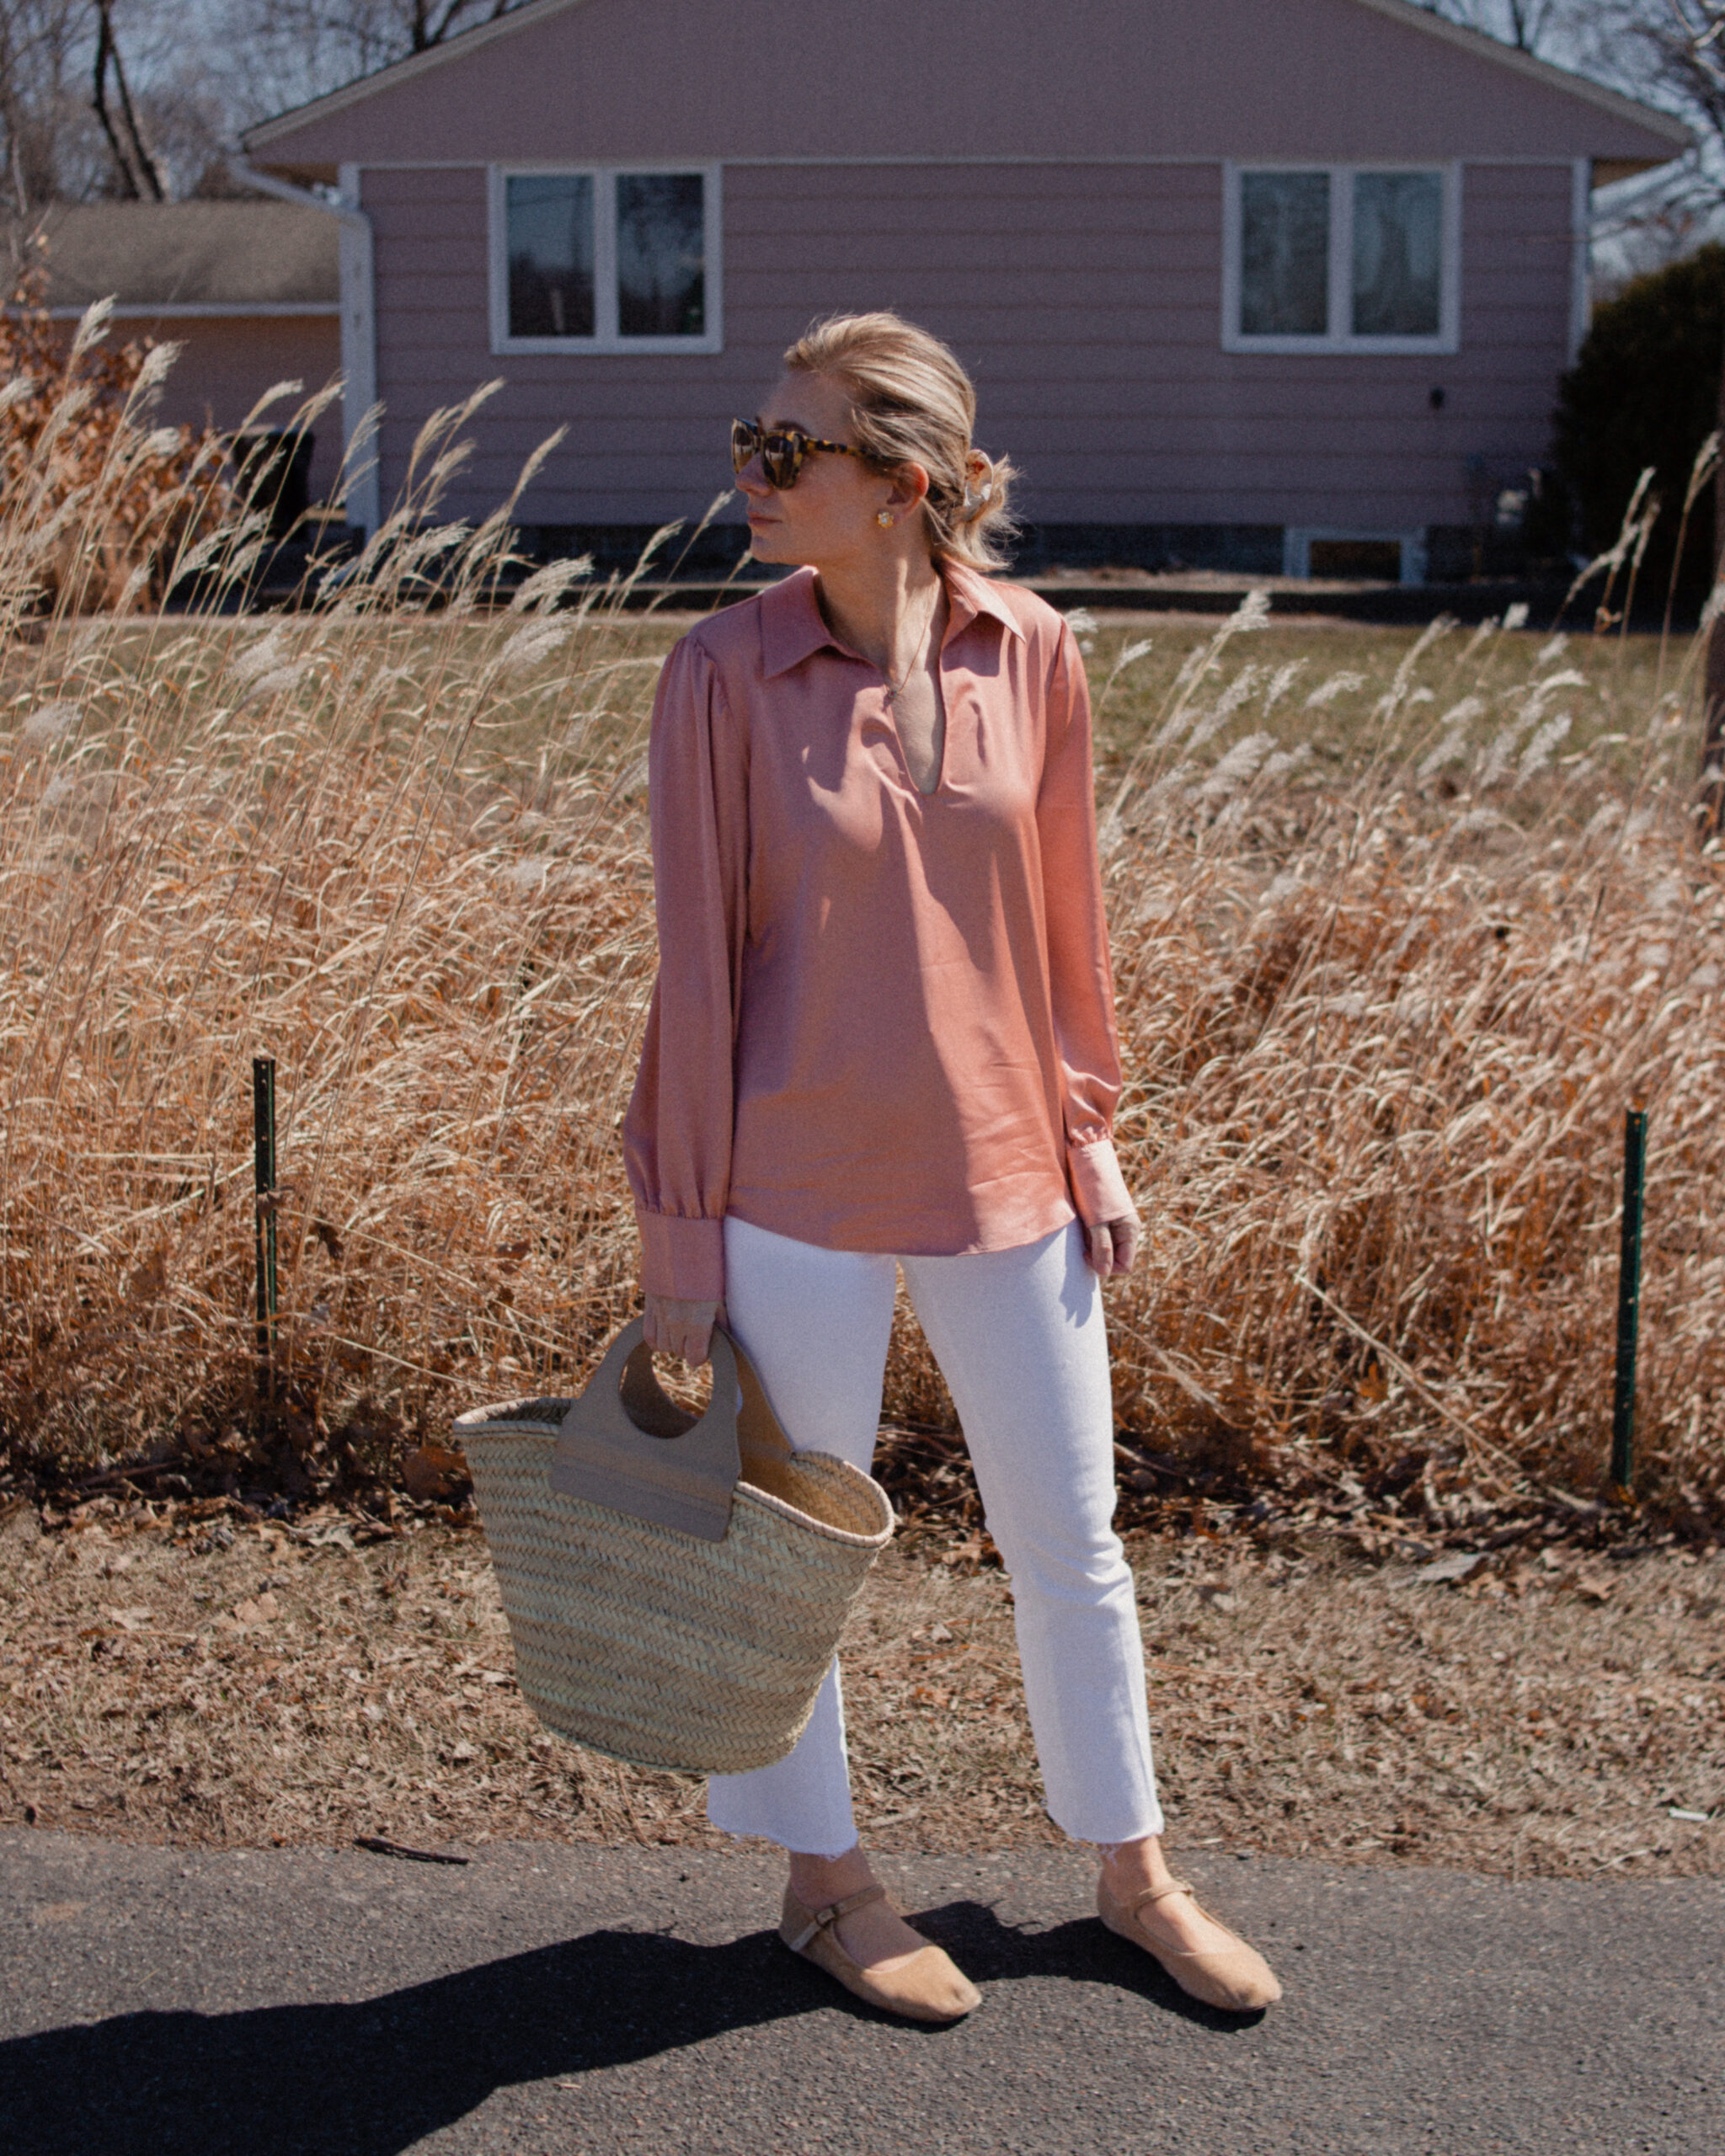 Karin Emily wears a pink satin blouse over white jeans paired with nude mary jane flats and a hereu basket bag